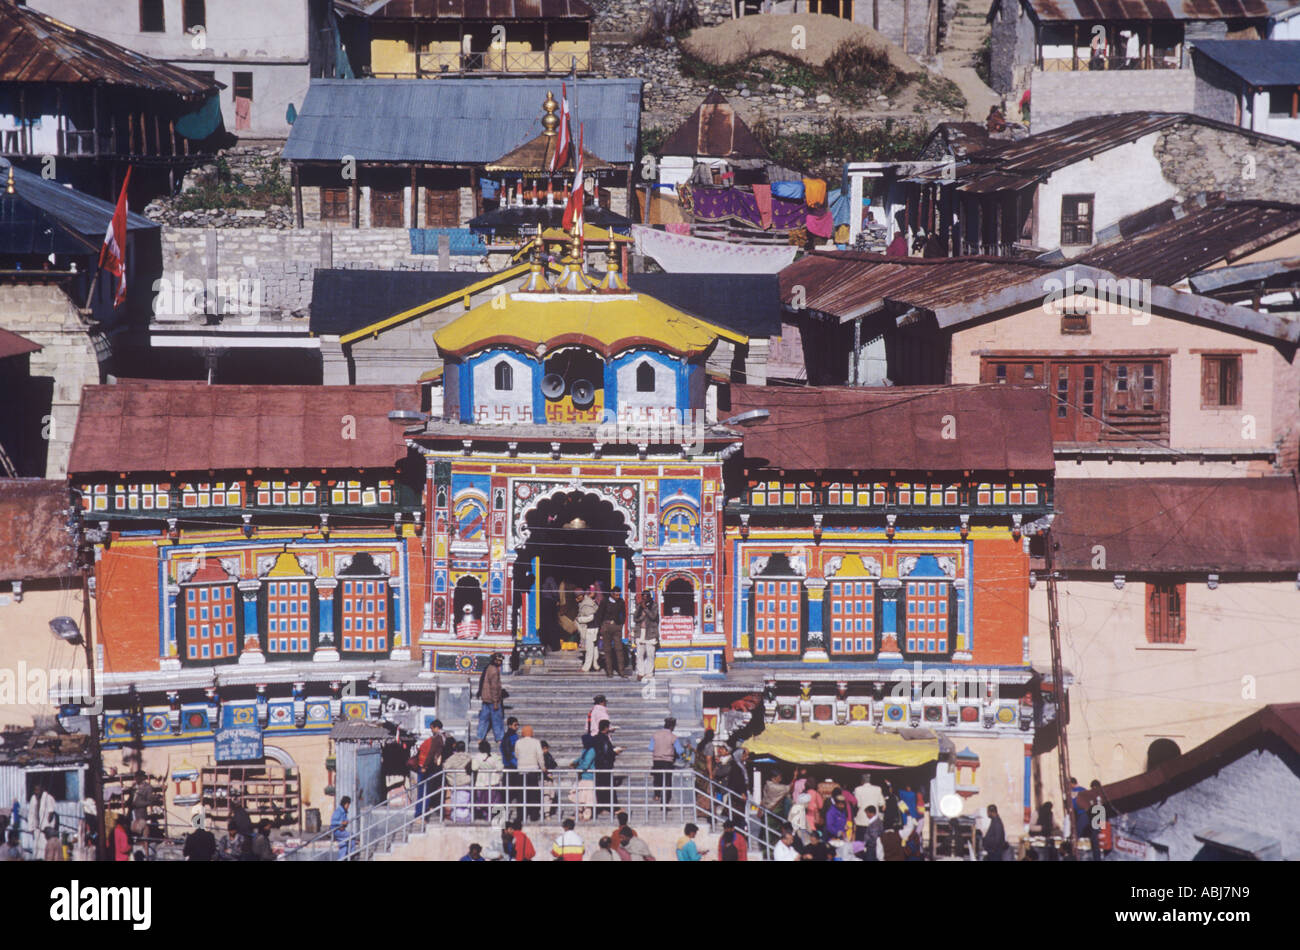 Badrinath Temple, sacred pilgrimage site in the Central Himalayan region of Uttar Pradesh, north India Stock Photo